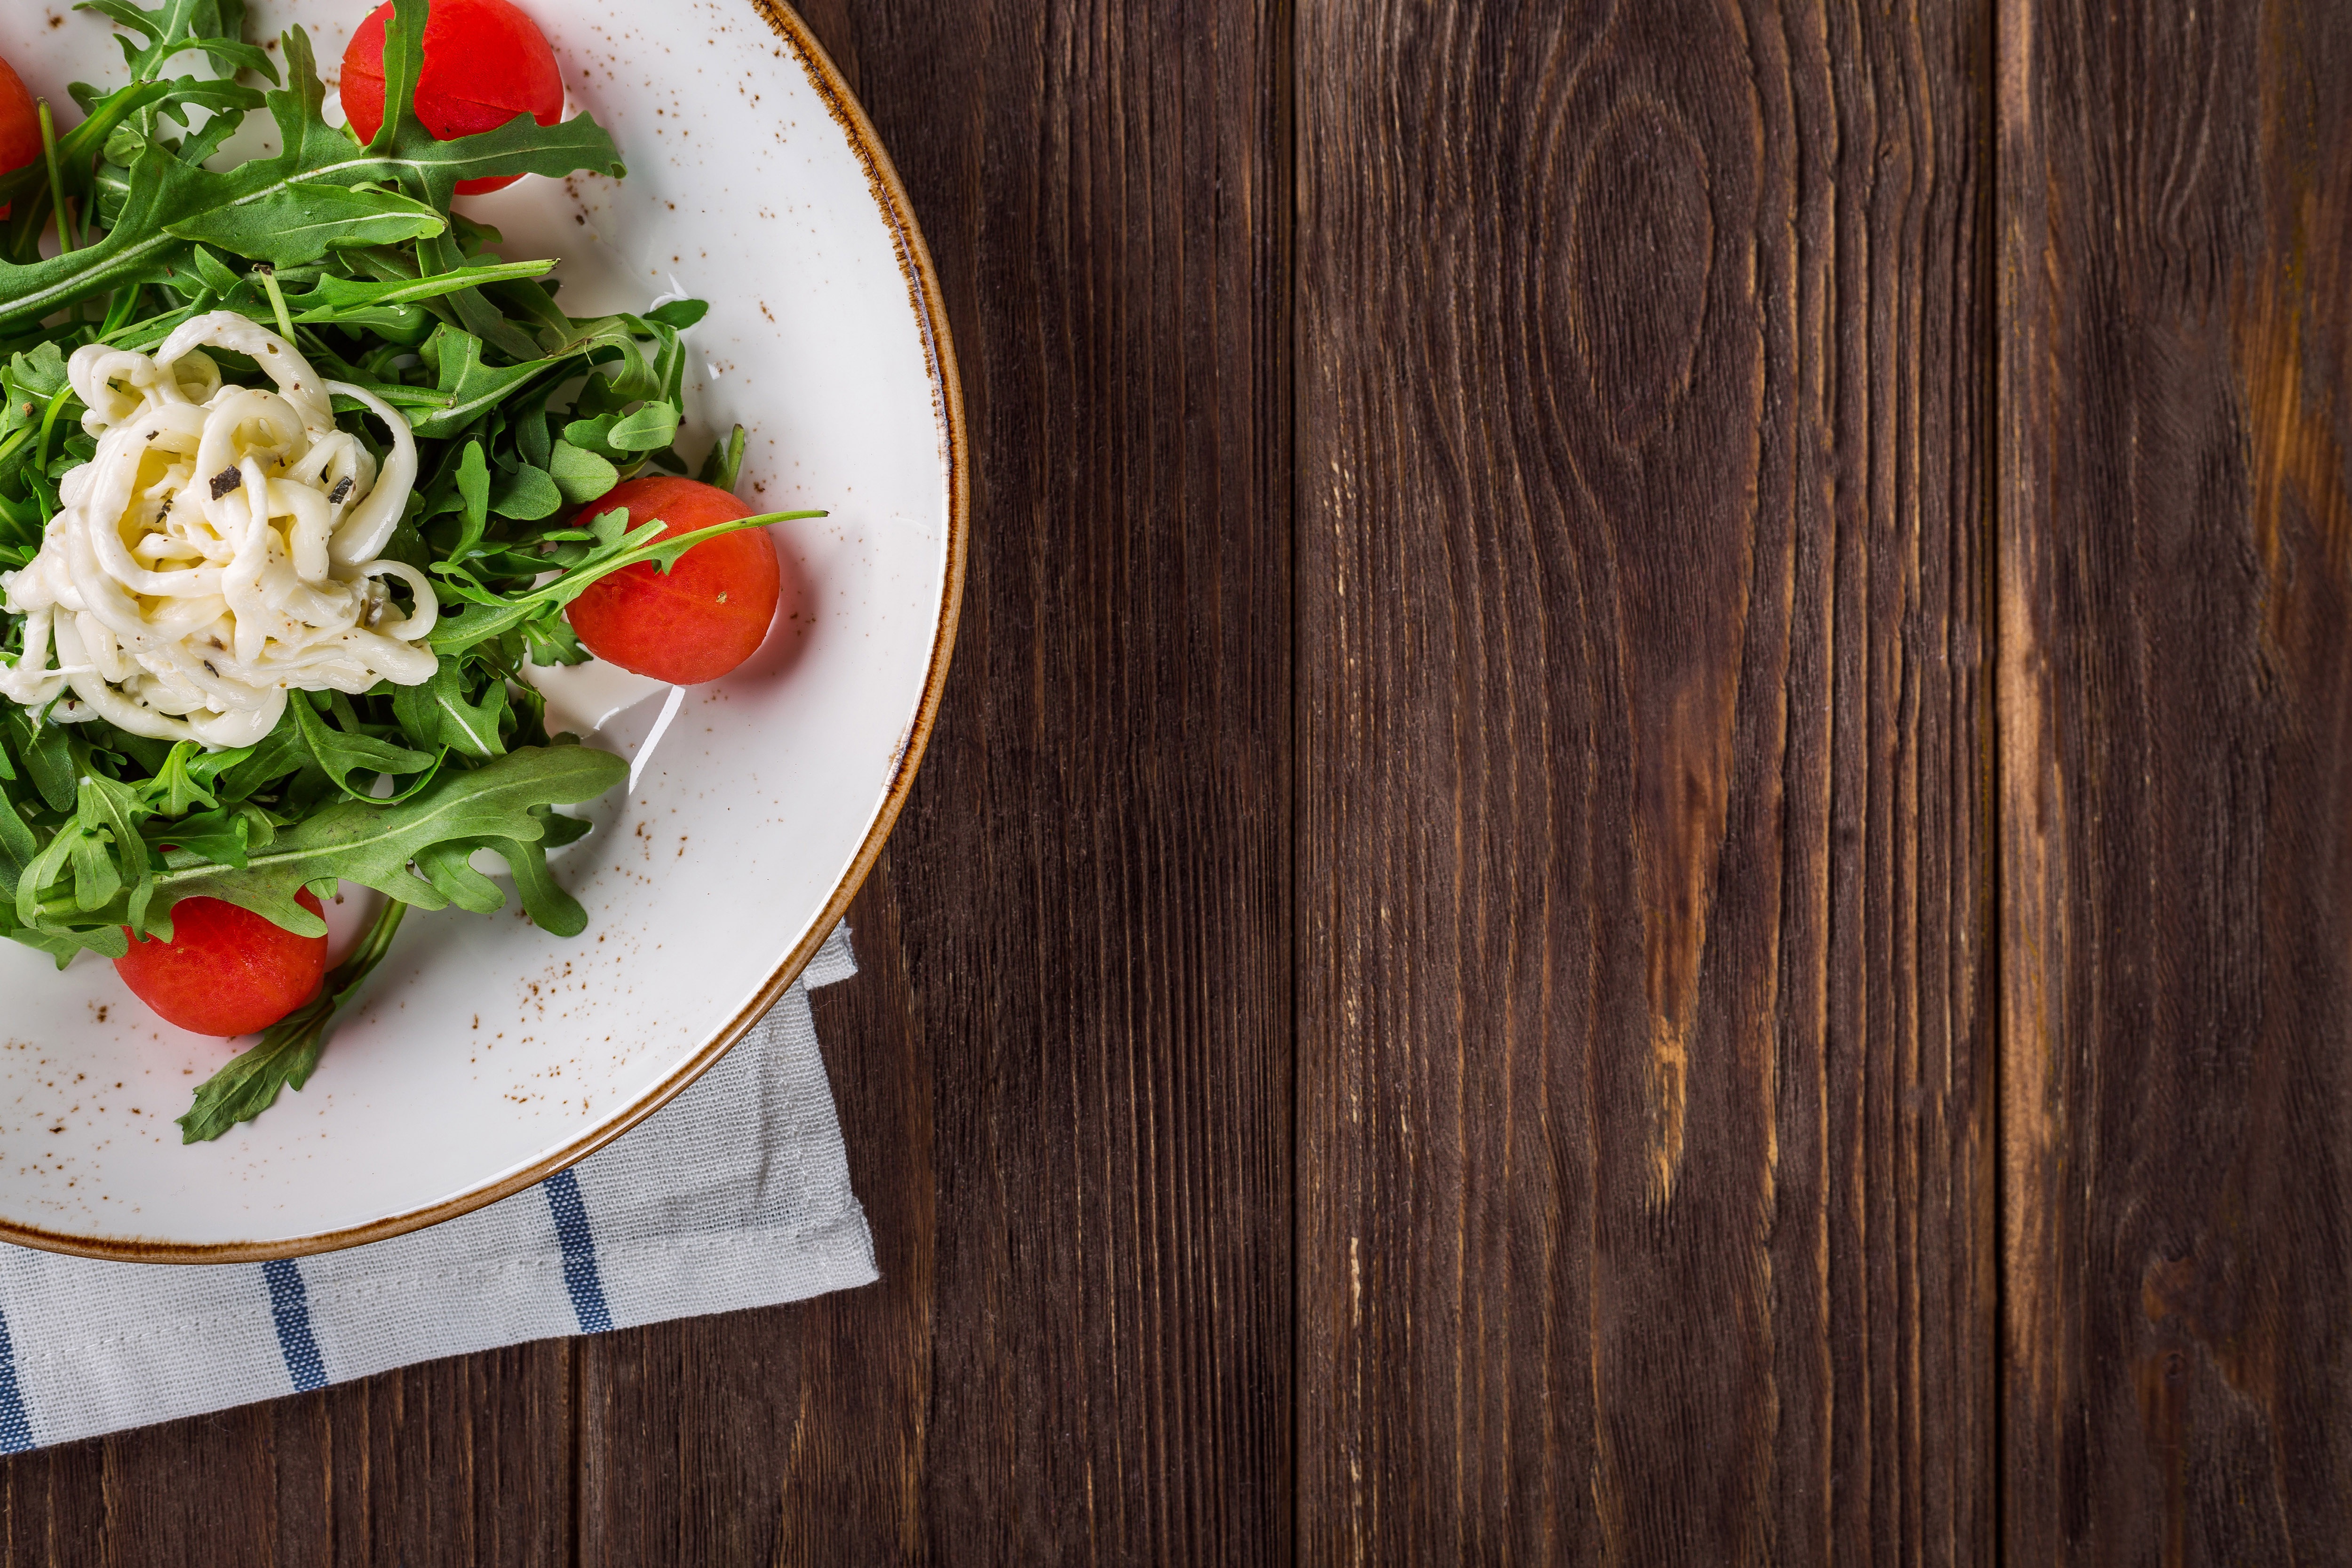 Salad on Wood Table Background Royalty-Free Stock Photo